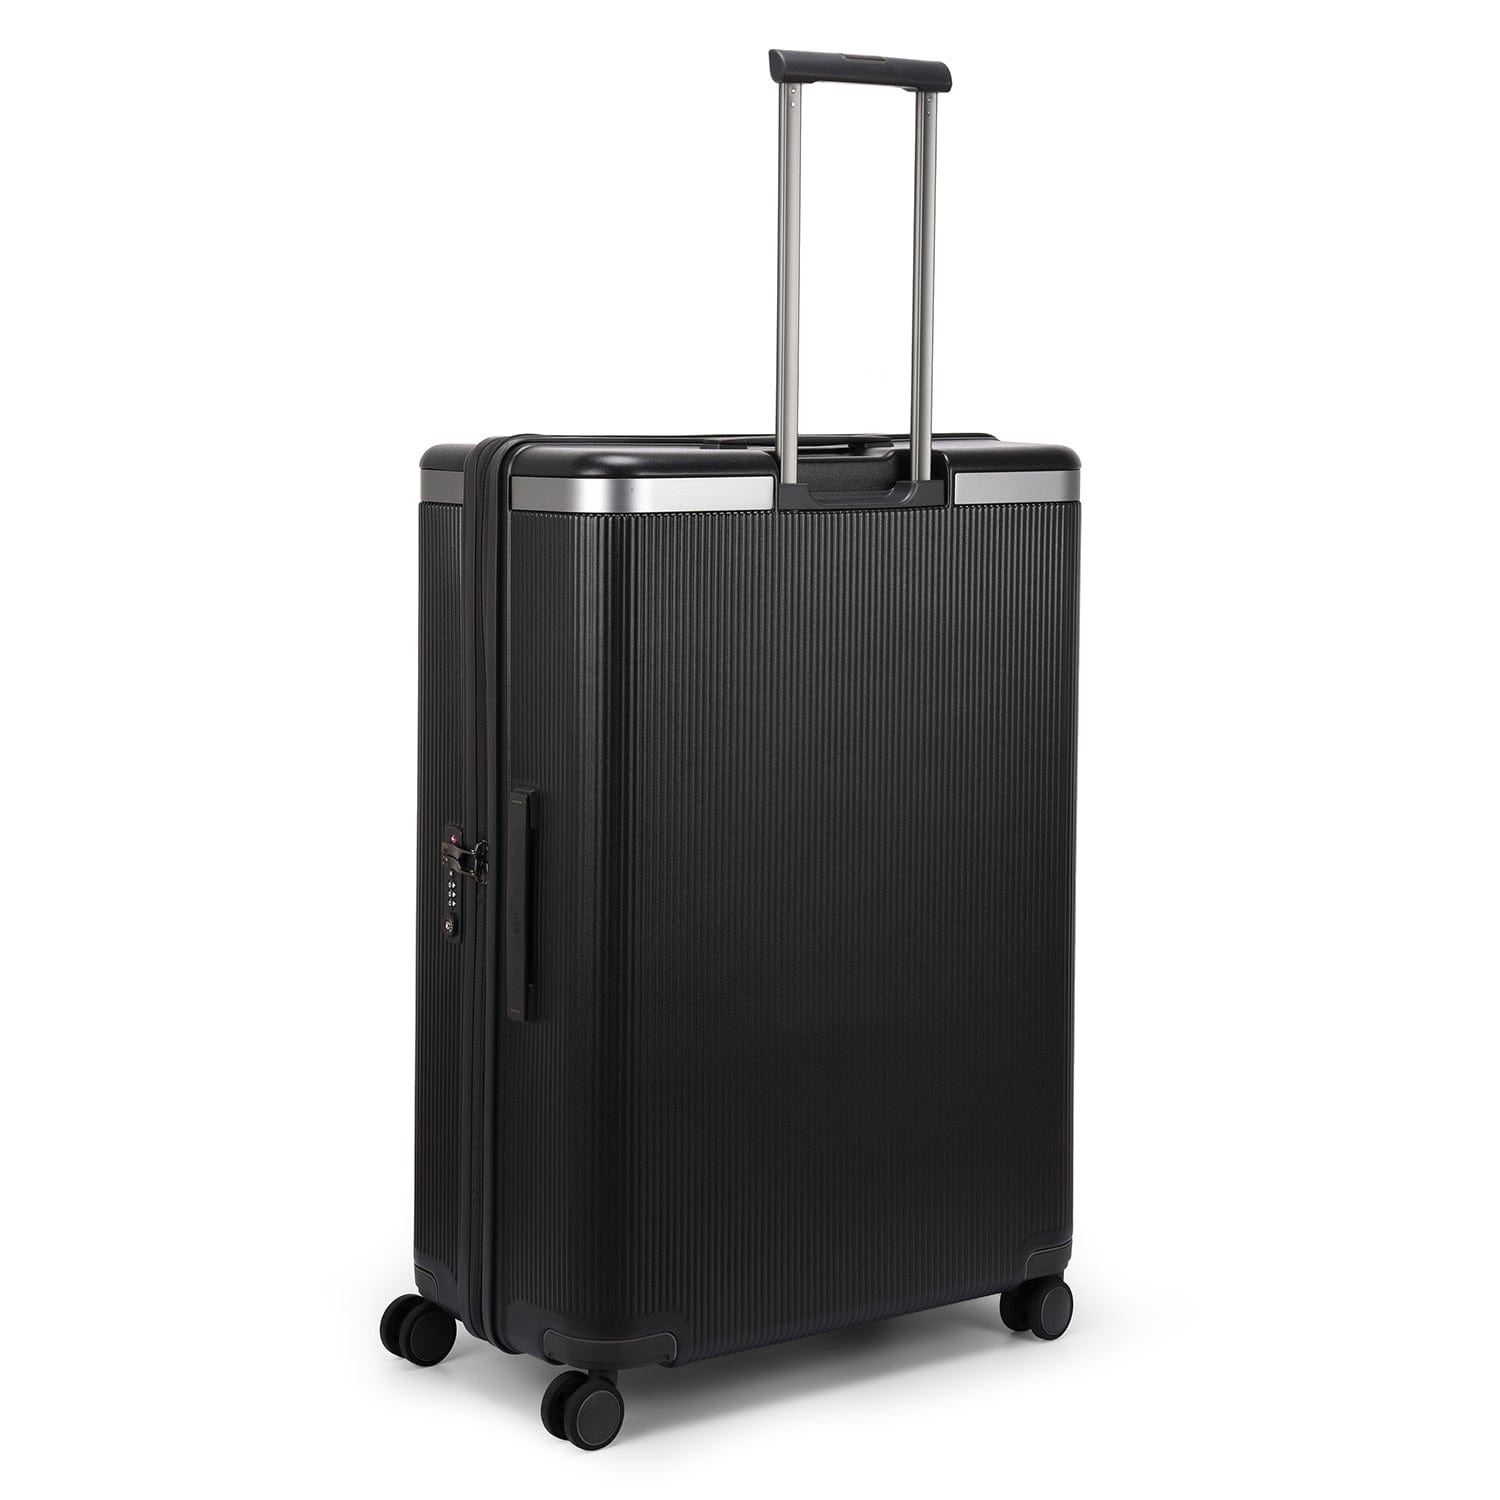 Echolac Dynasty 76.5cm Hardcase Non-Expandable 4 Double Wheel Check-In Luggage Trolley Vulcan Grey - PC142 28 VULCAN GREY